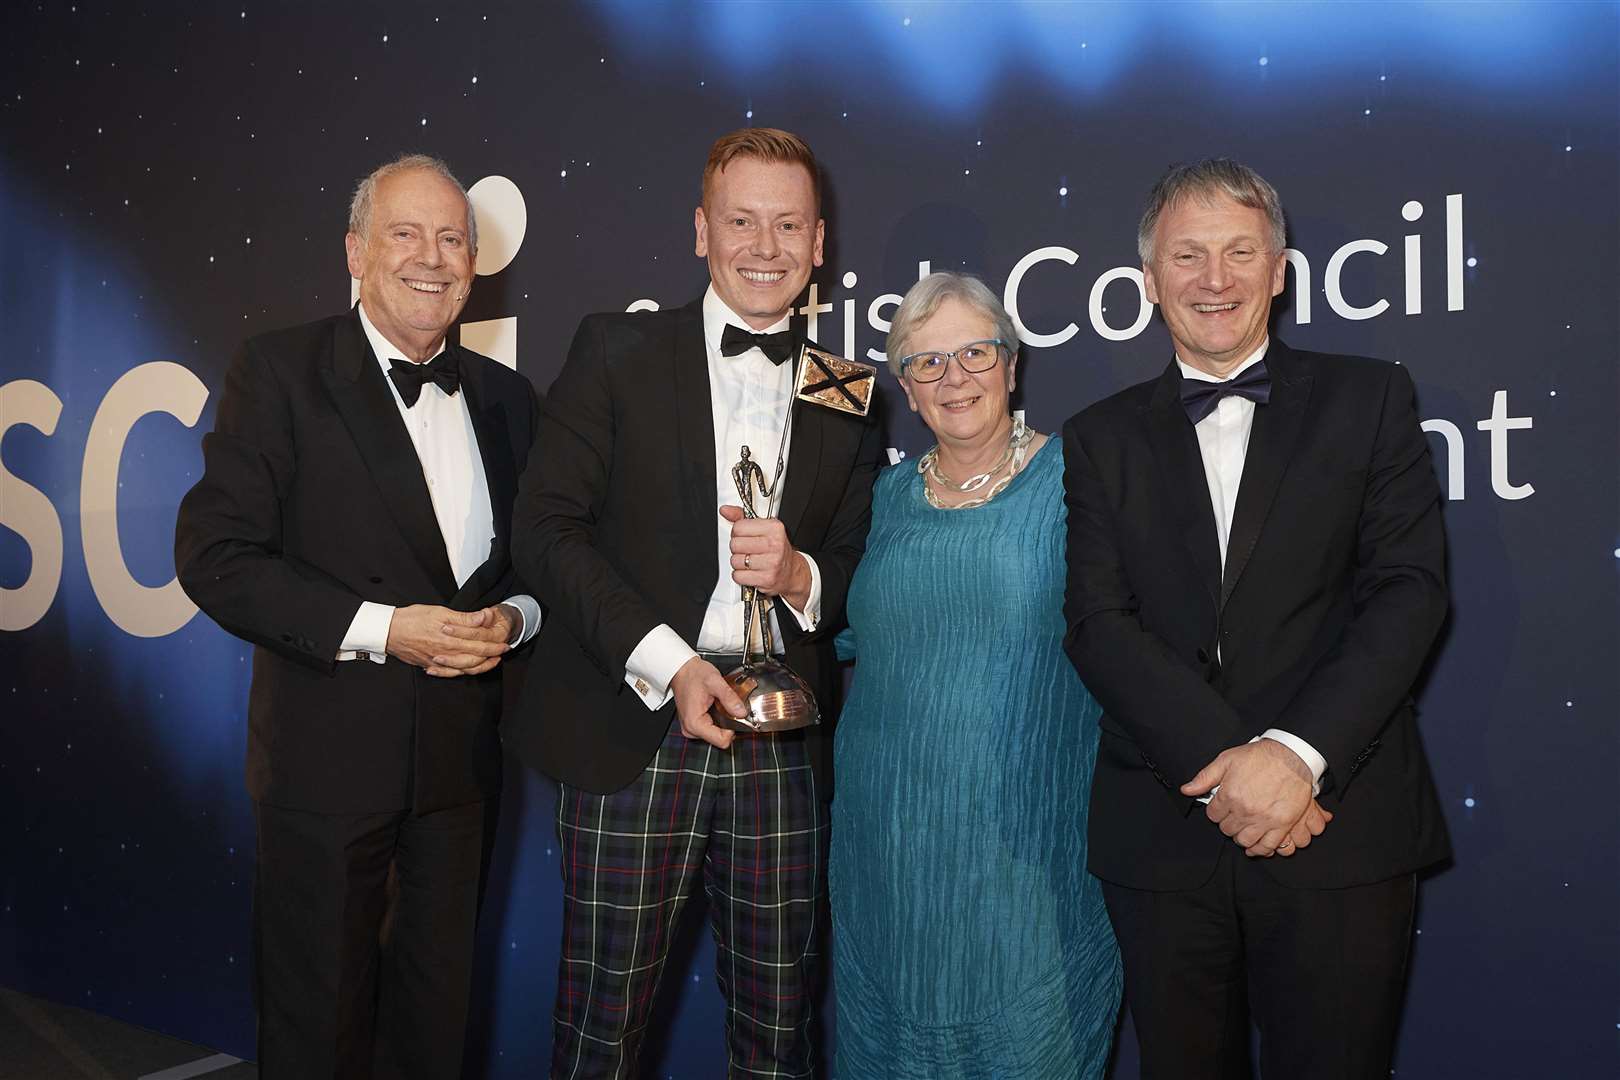 This week saw the 2021 SCDI Highlands and Islands Business Excellence Awards – though unlike past years, as here, winners and hosts could only meet virtually.